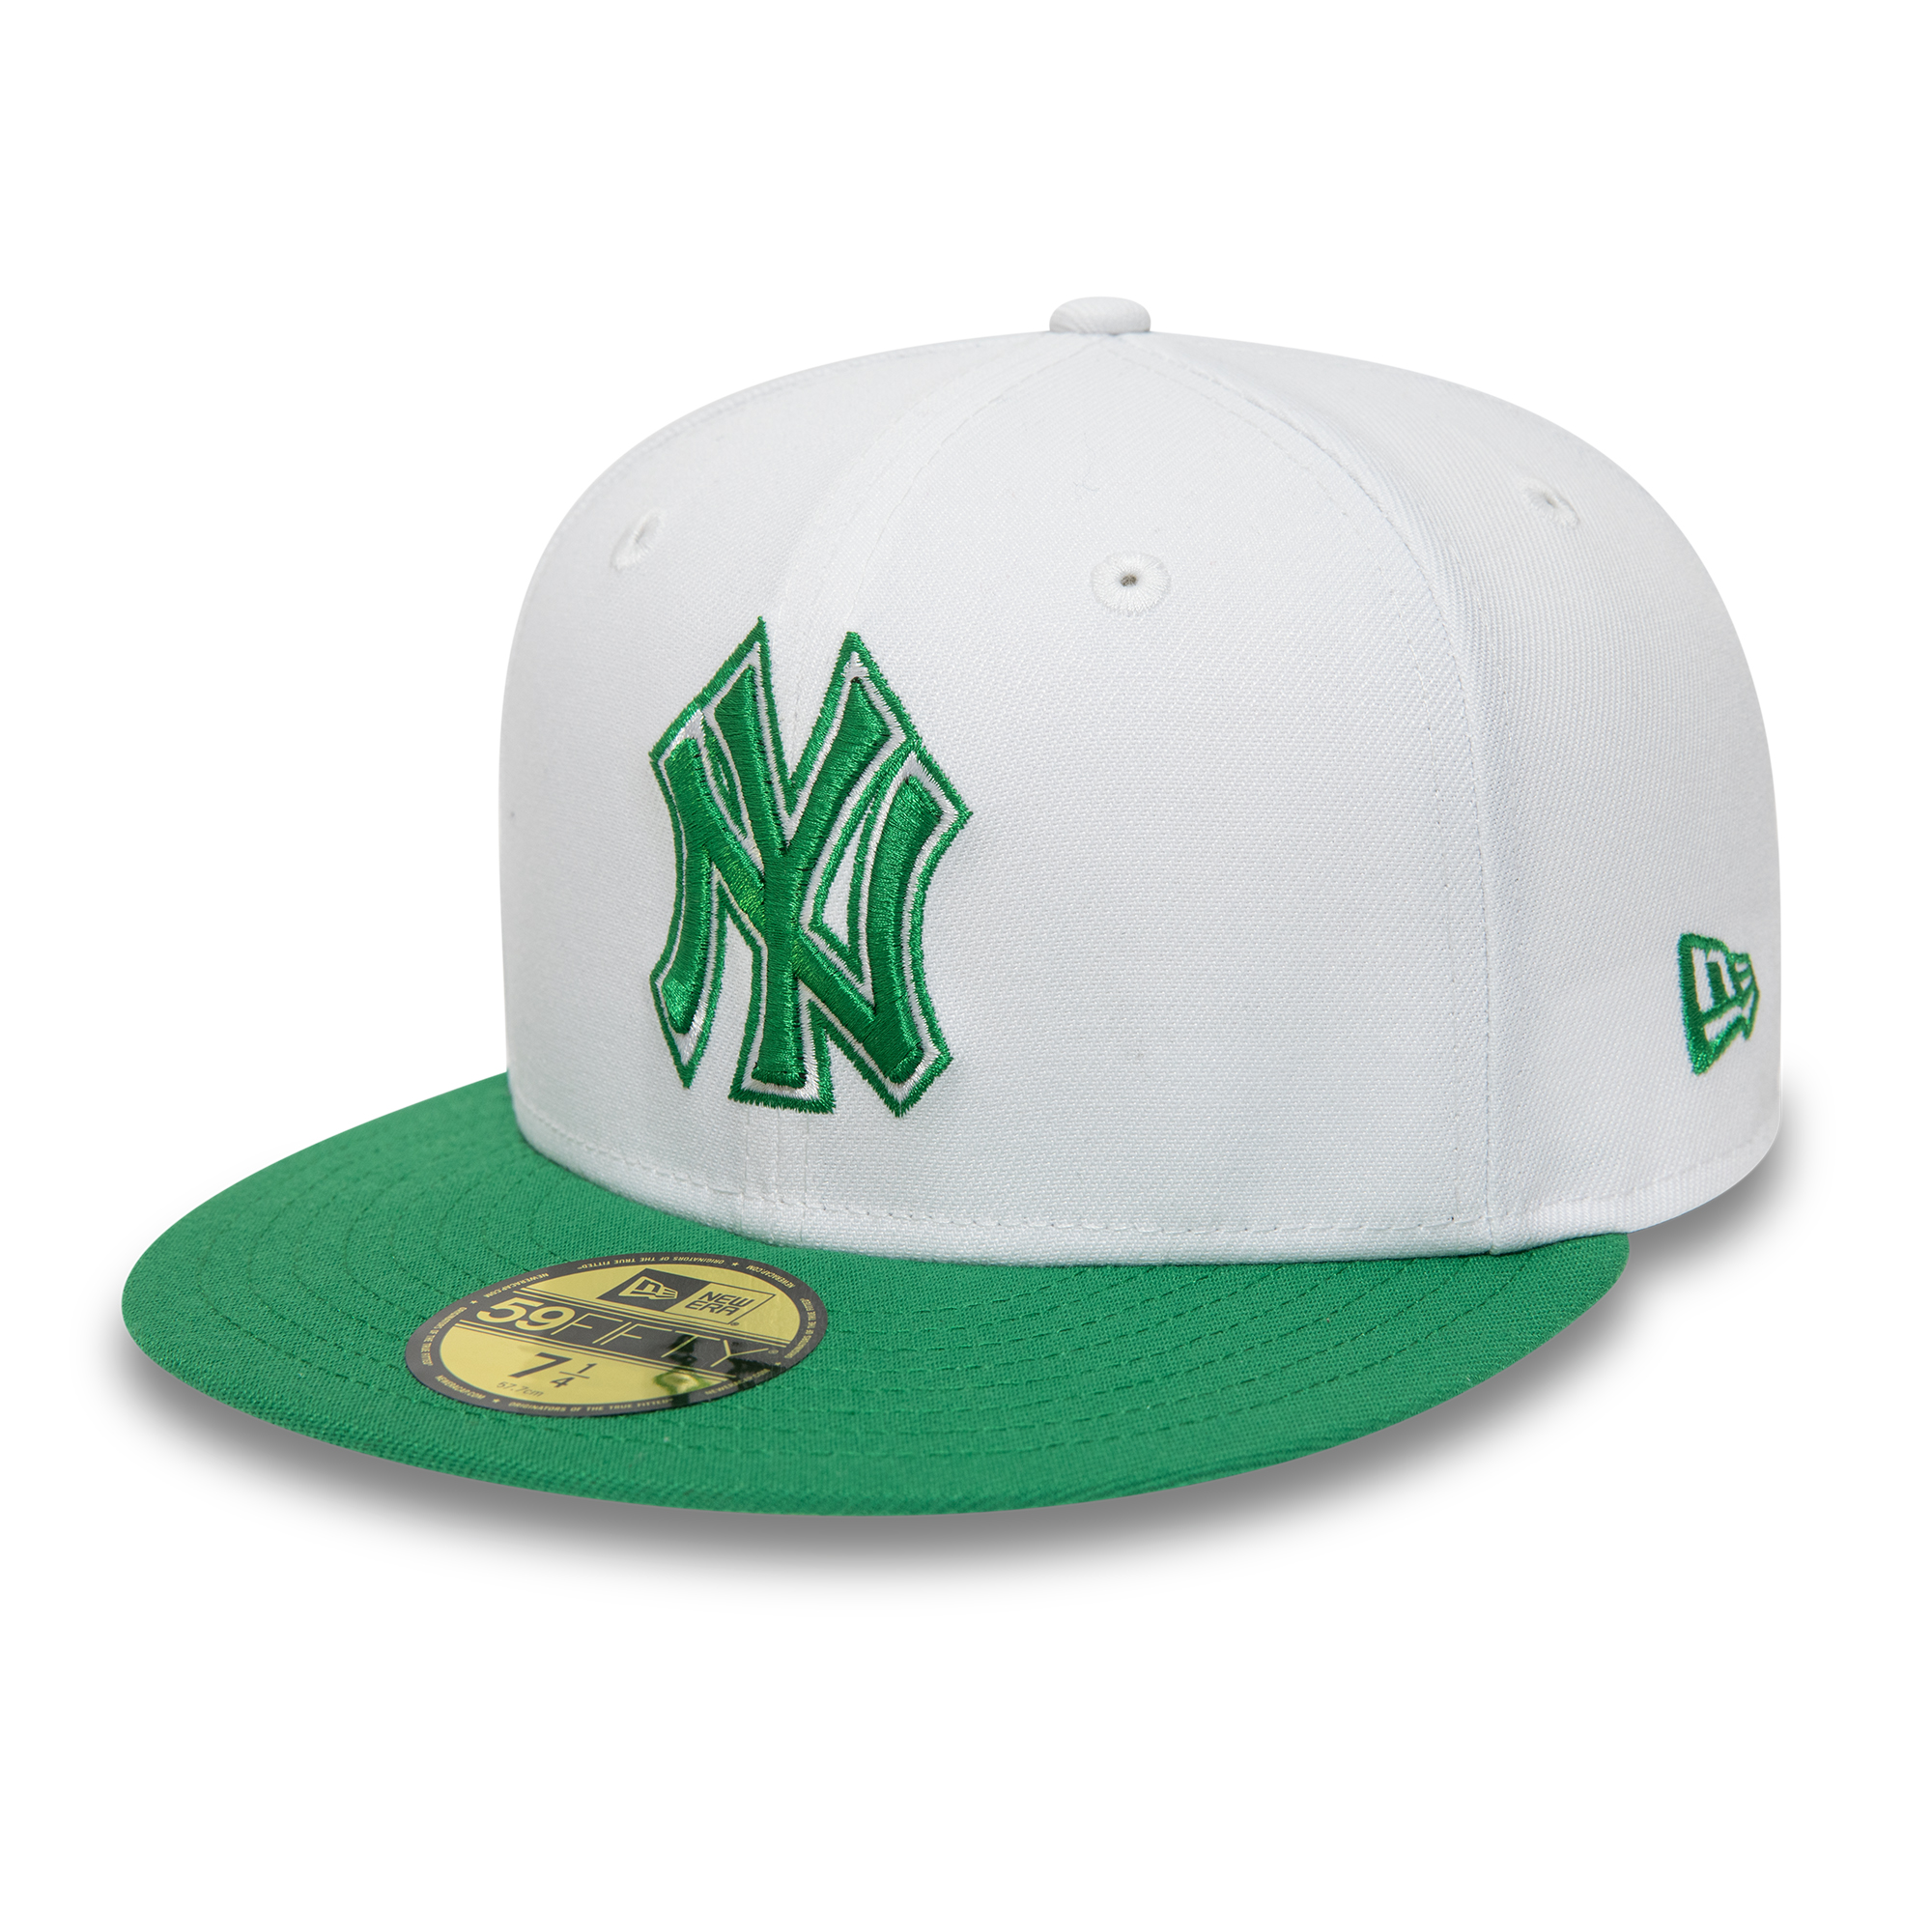 Official New Era New York Yankees White 59FIFTY Fitted Cap B8525_282 ...